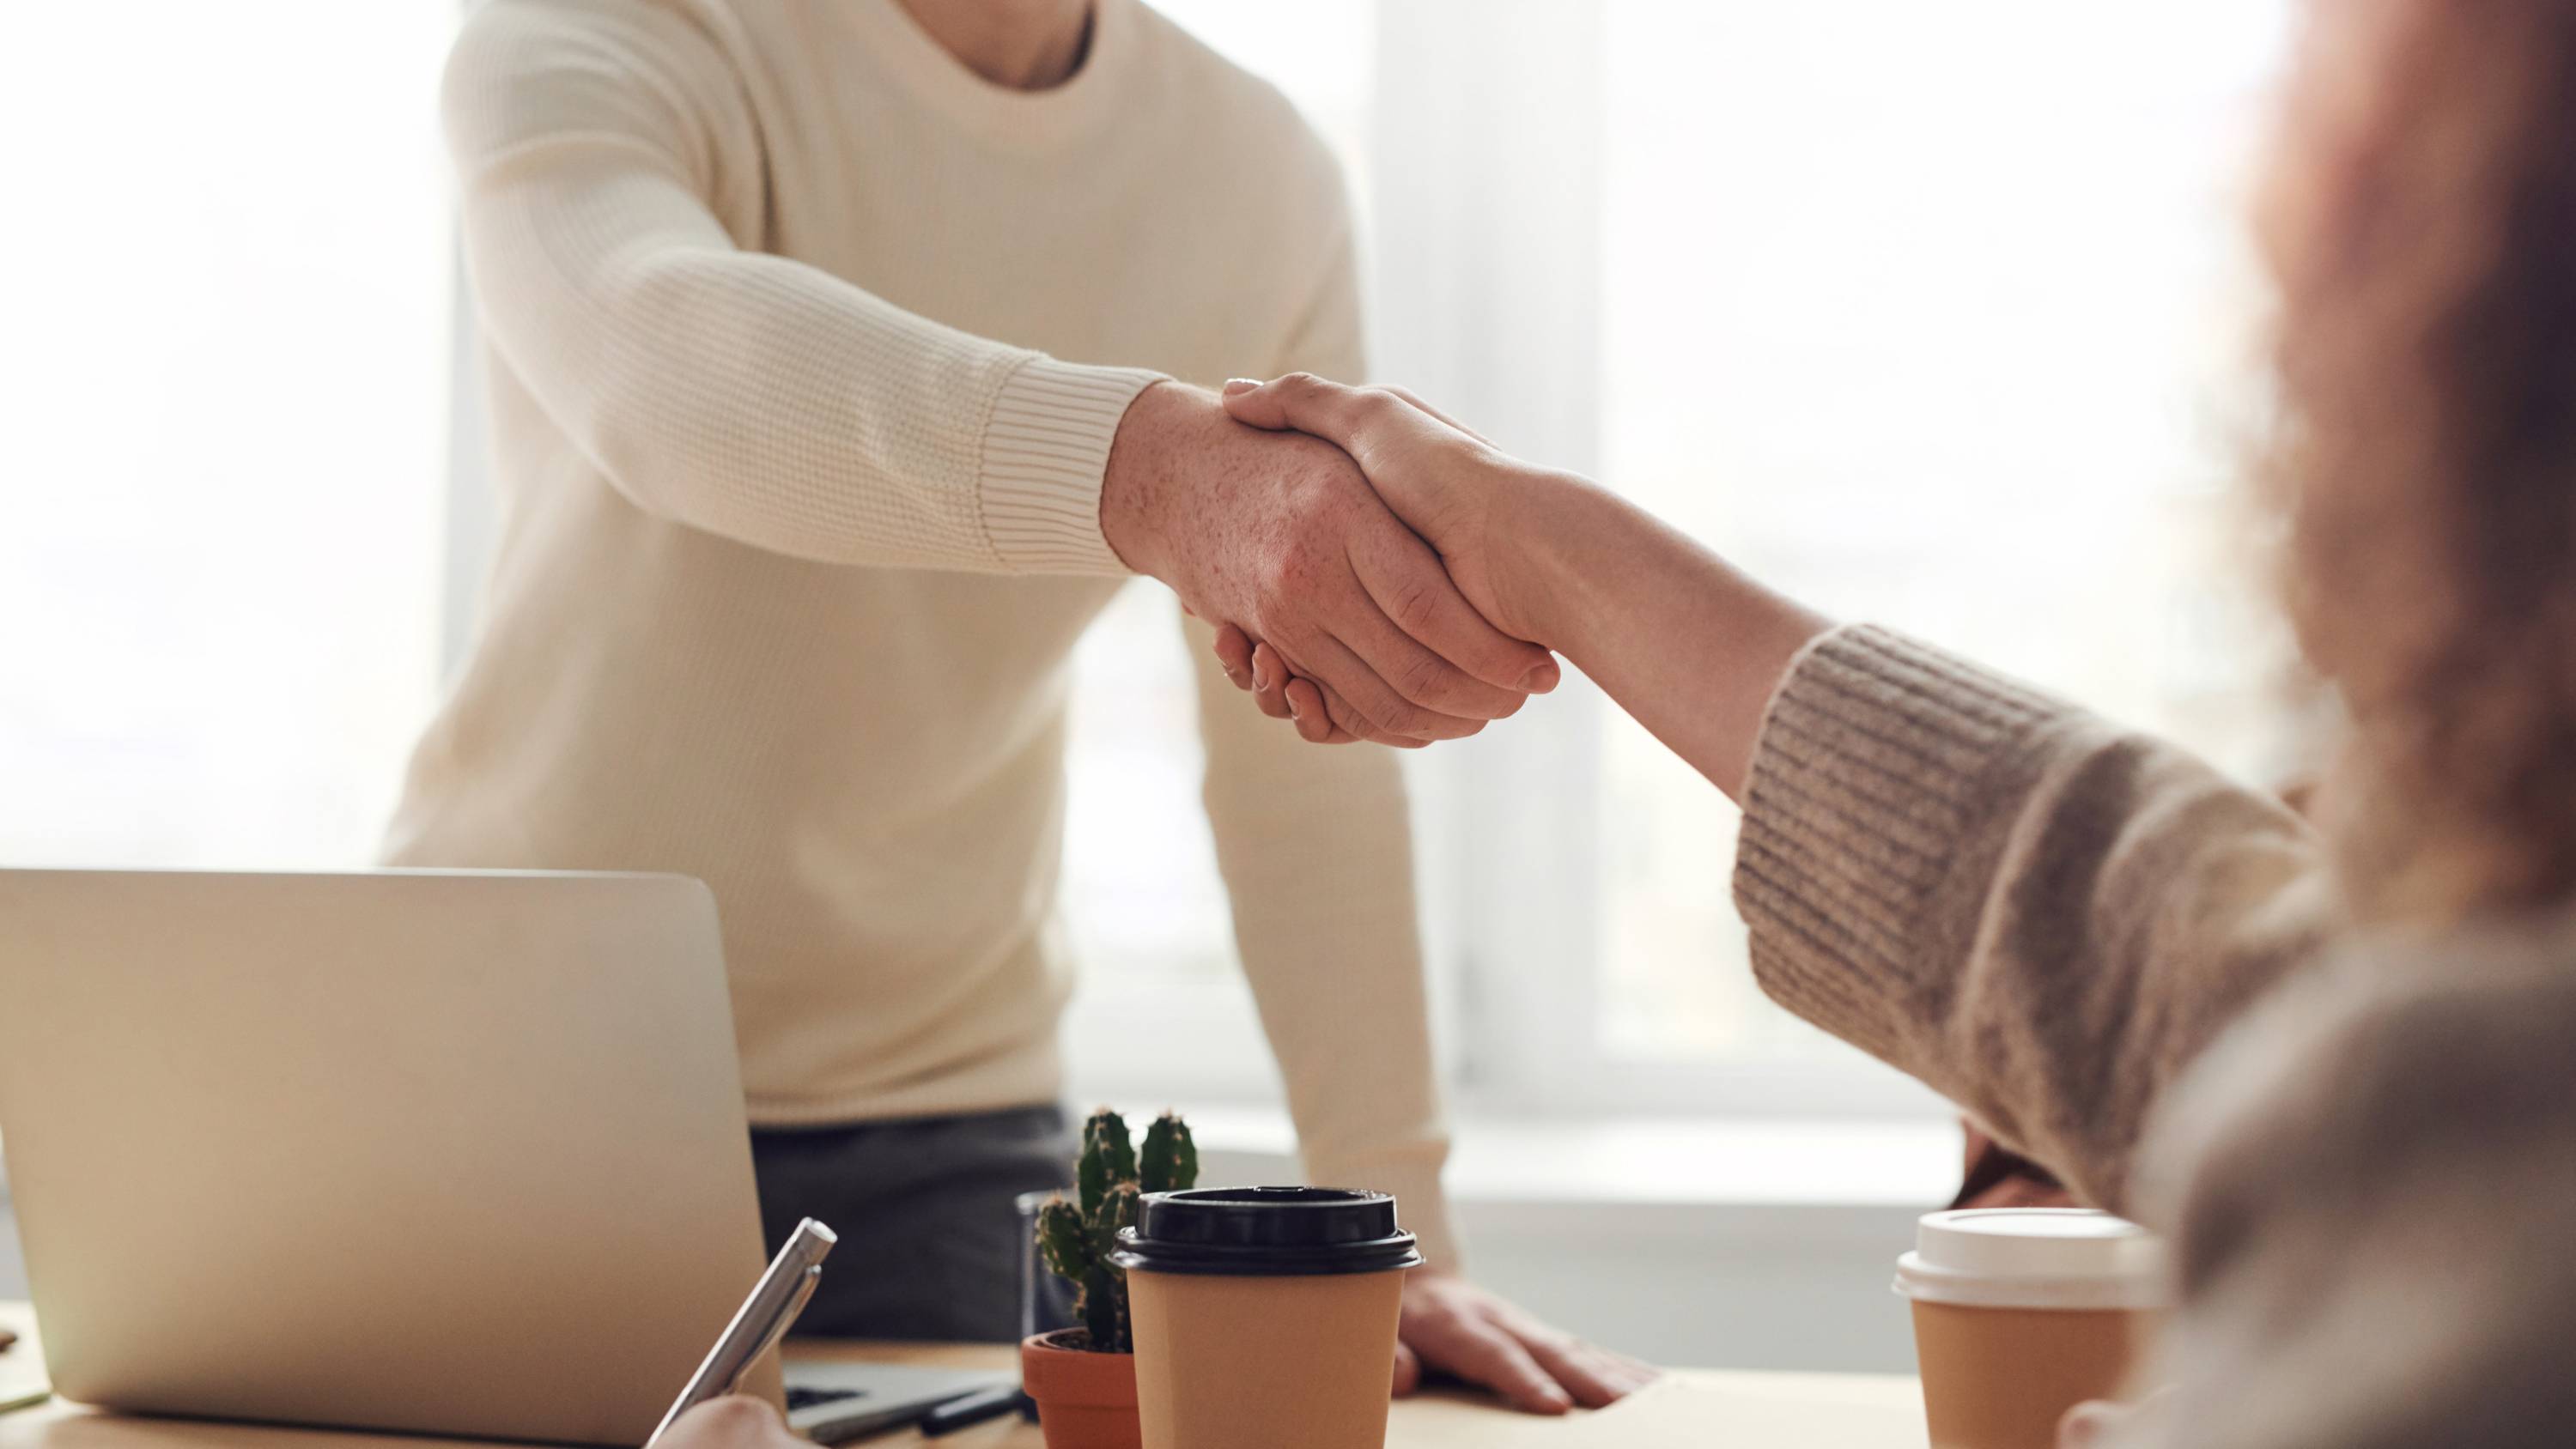 Two people shaking hands in an office